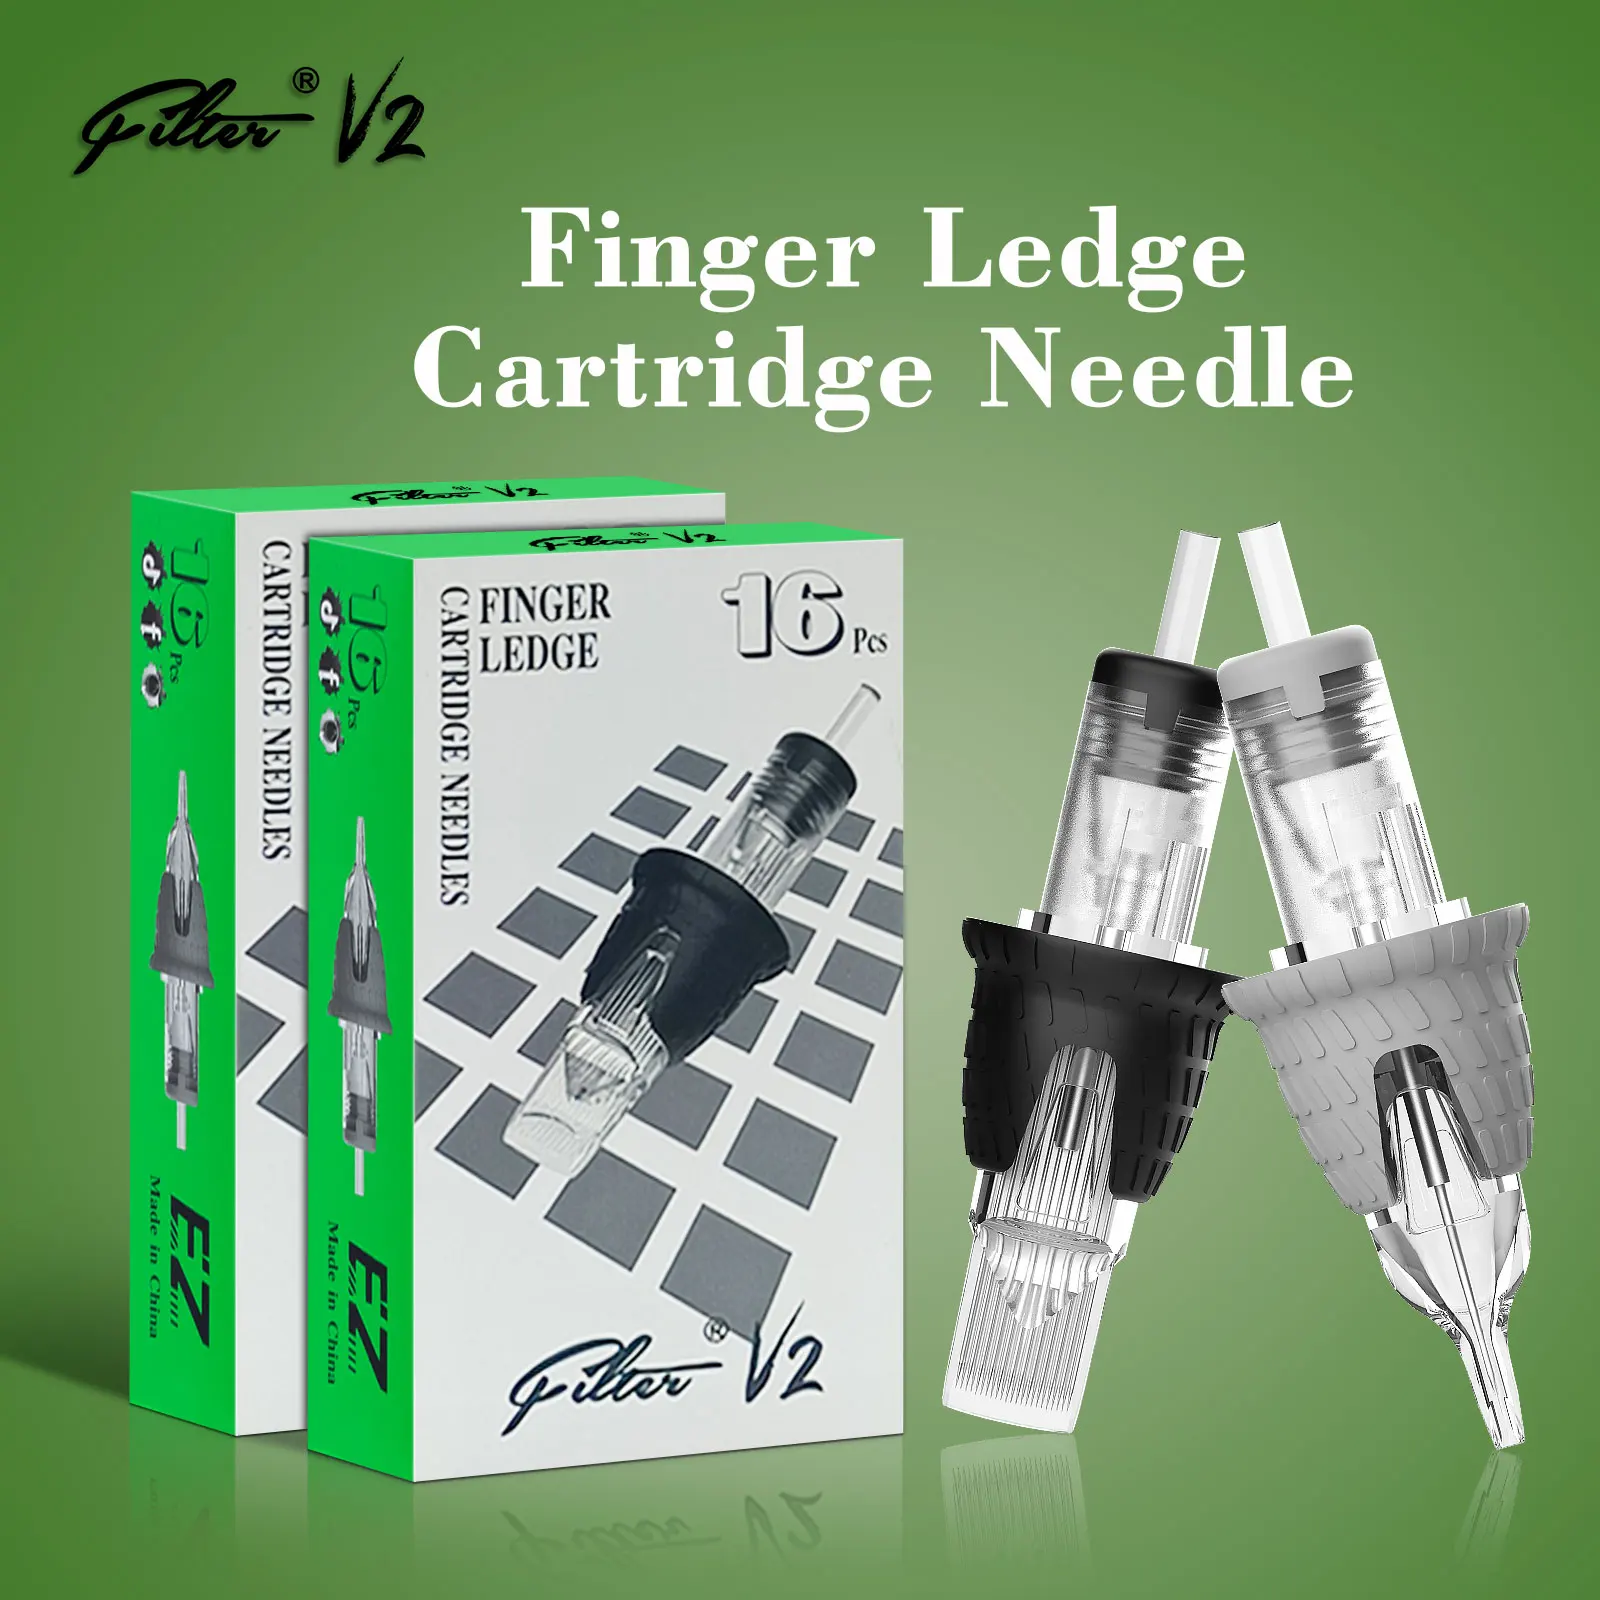 

EZ Filter V2 Disposable Sterilized Safety Tattoo Needles Cartridge for Tattoo Rotary Pen Round Liner Permanent Makeup 16pcs